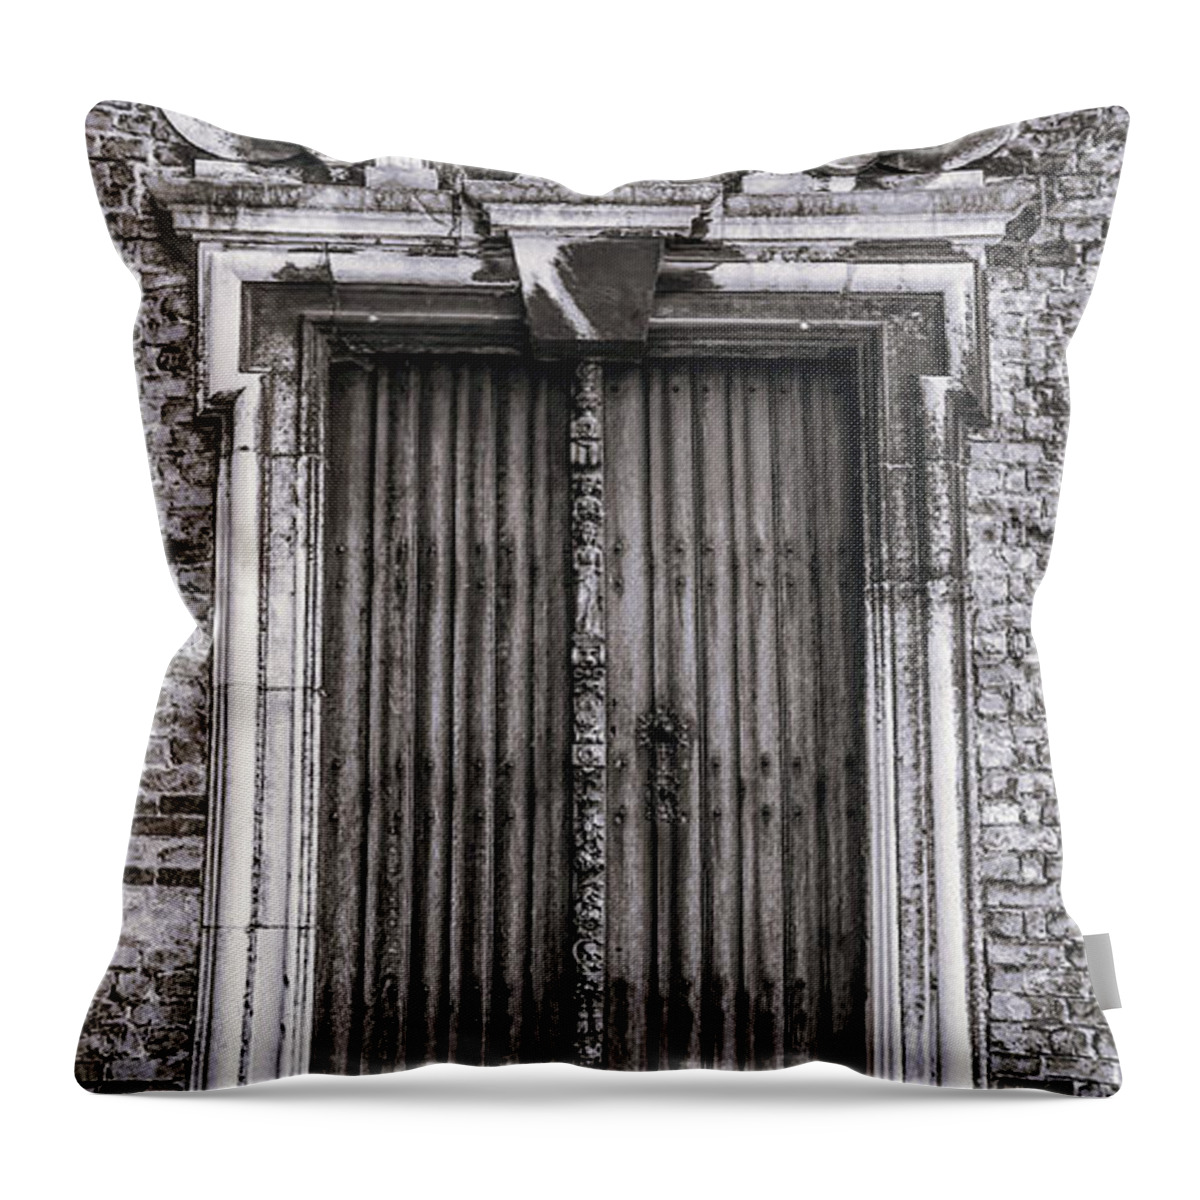 Doors Of The World Series By Lexa Harpell Throw Pillow featuring the photograph Bruges Door by Lexa Harpell